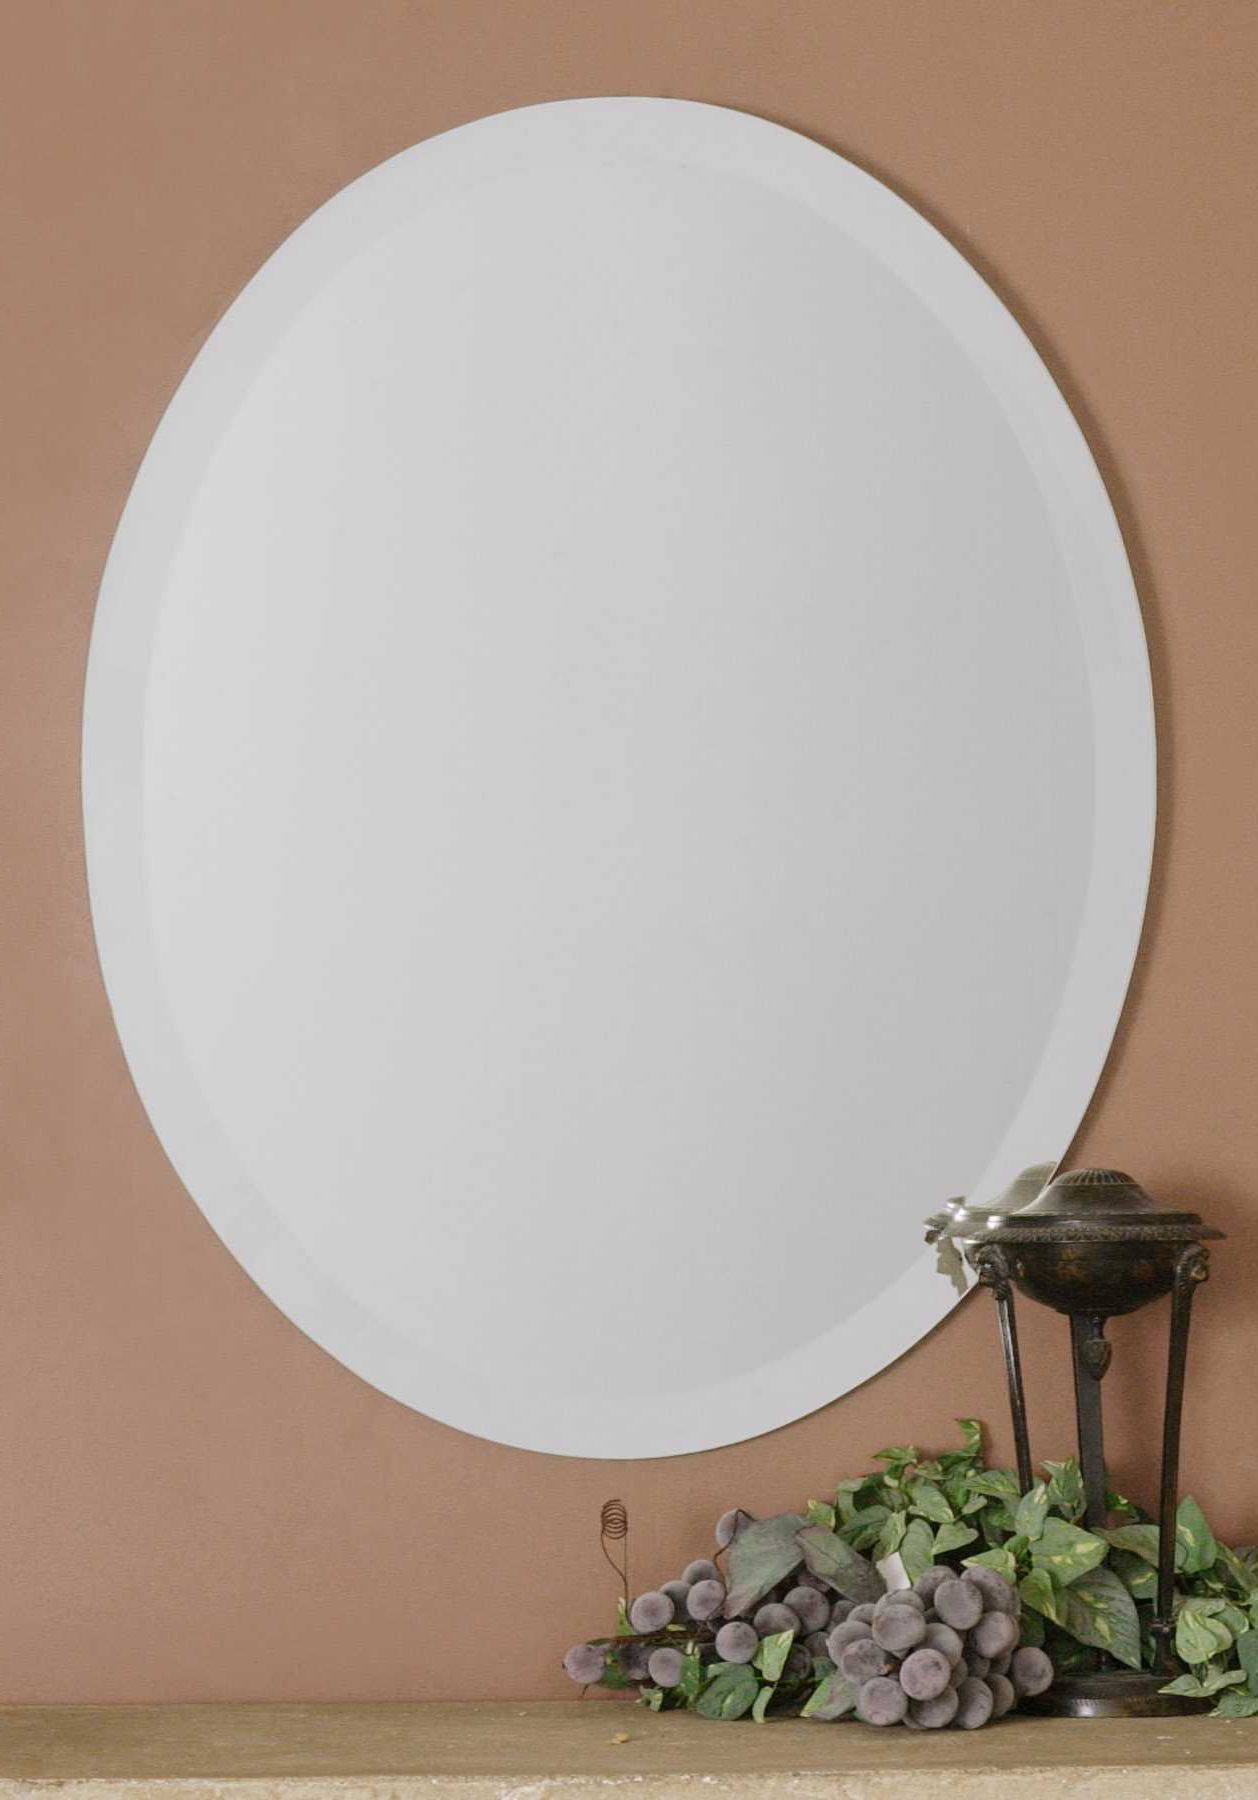 Frameless Polished Edge Oval Wall Mirror Bathroom Vanity Large 36 With Regard To Preferred Ceiling Hung Polished Nickel Oval Mirrors (View 15 of 15)